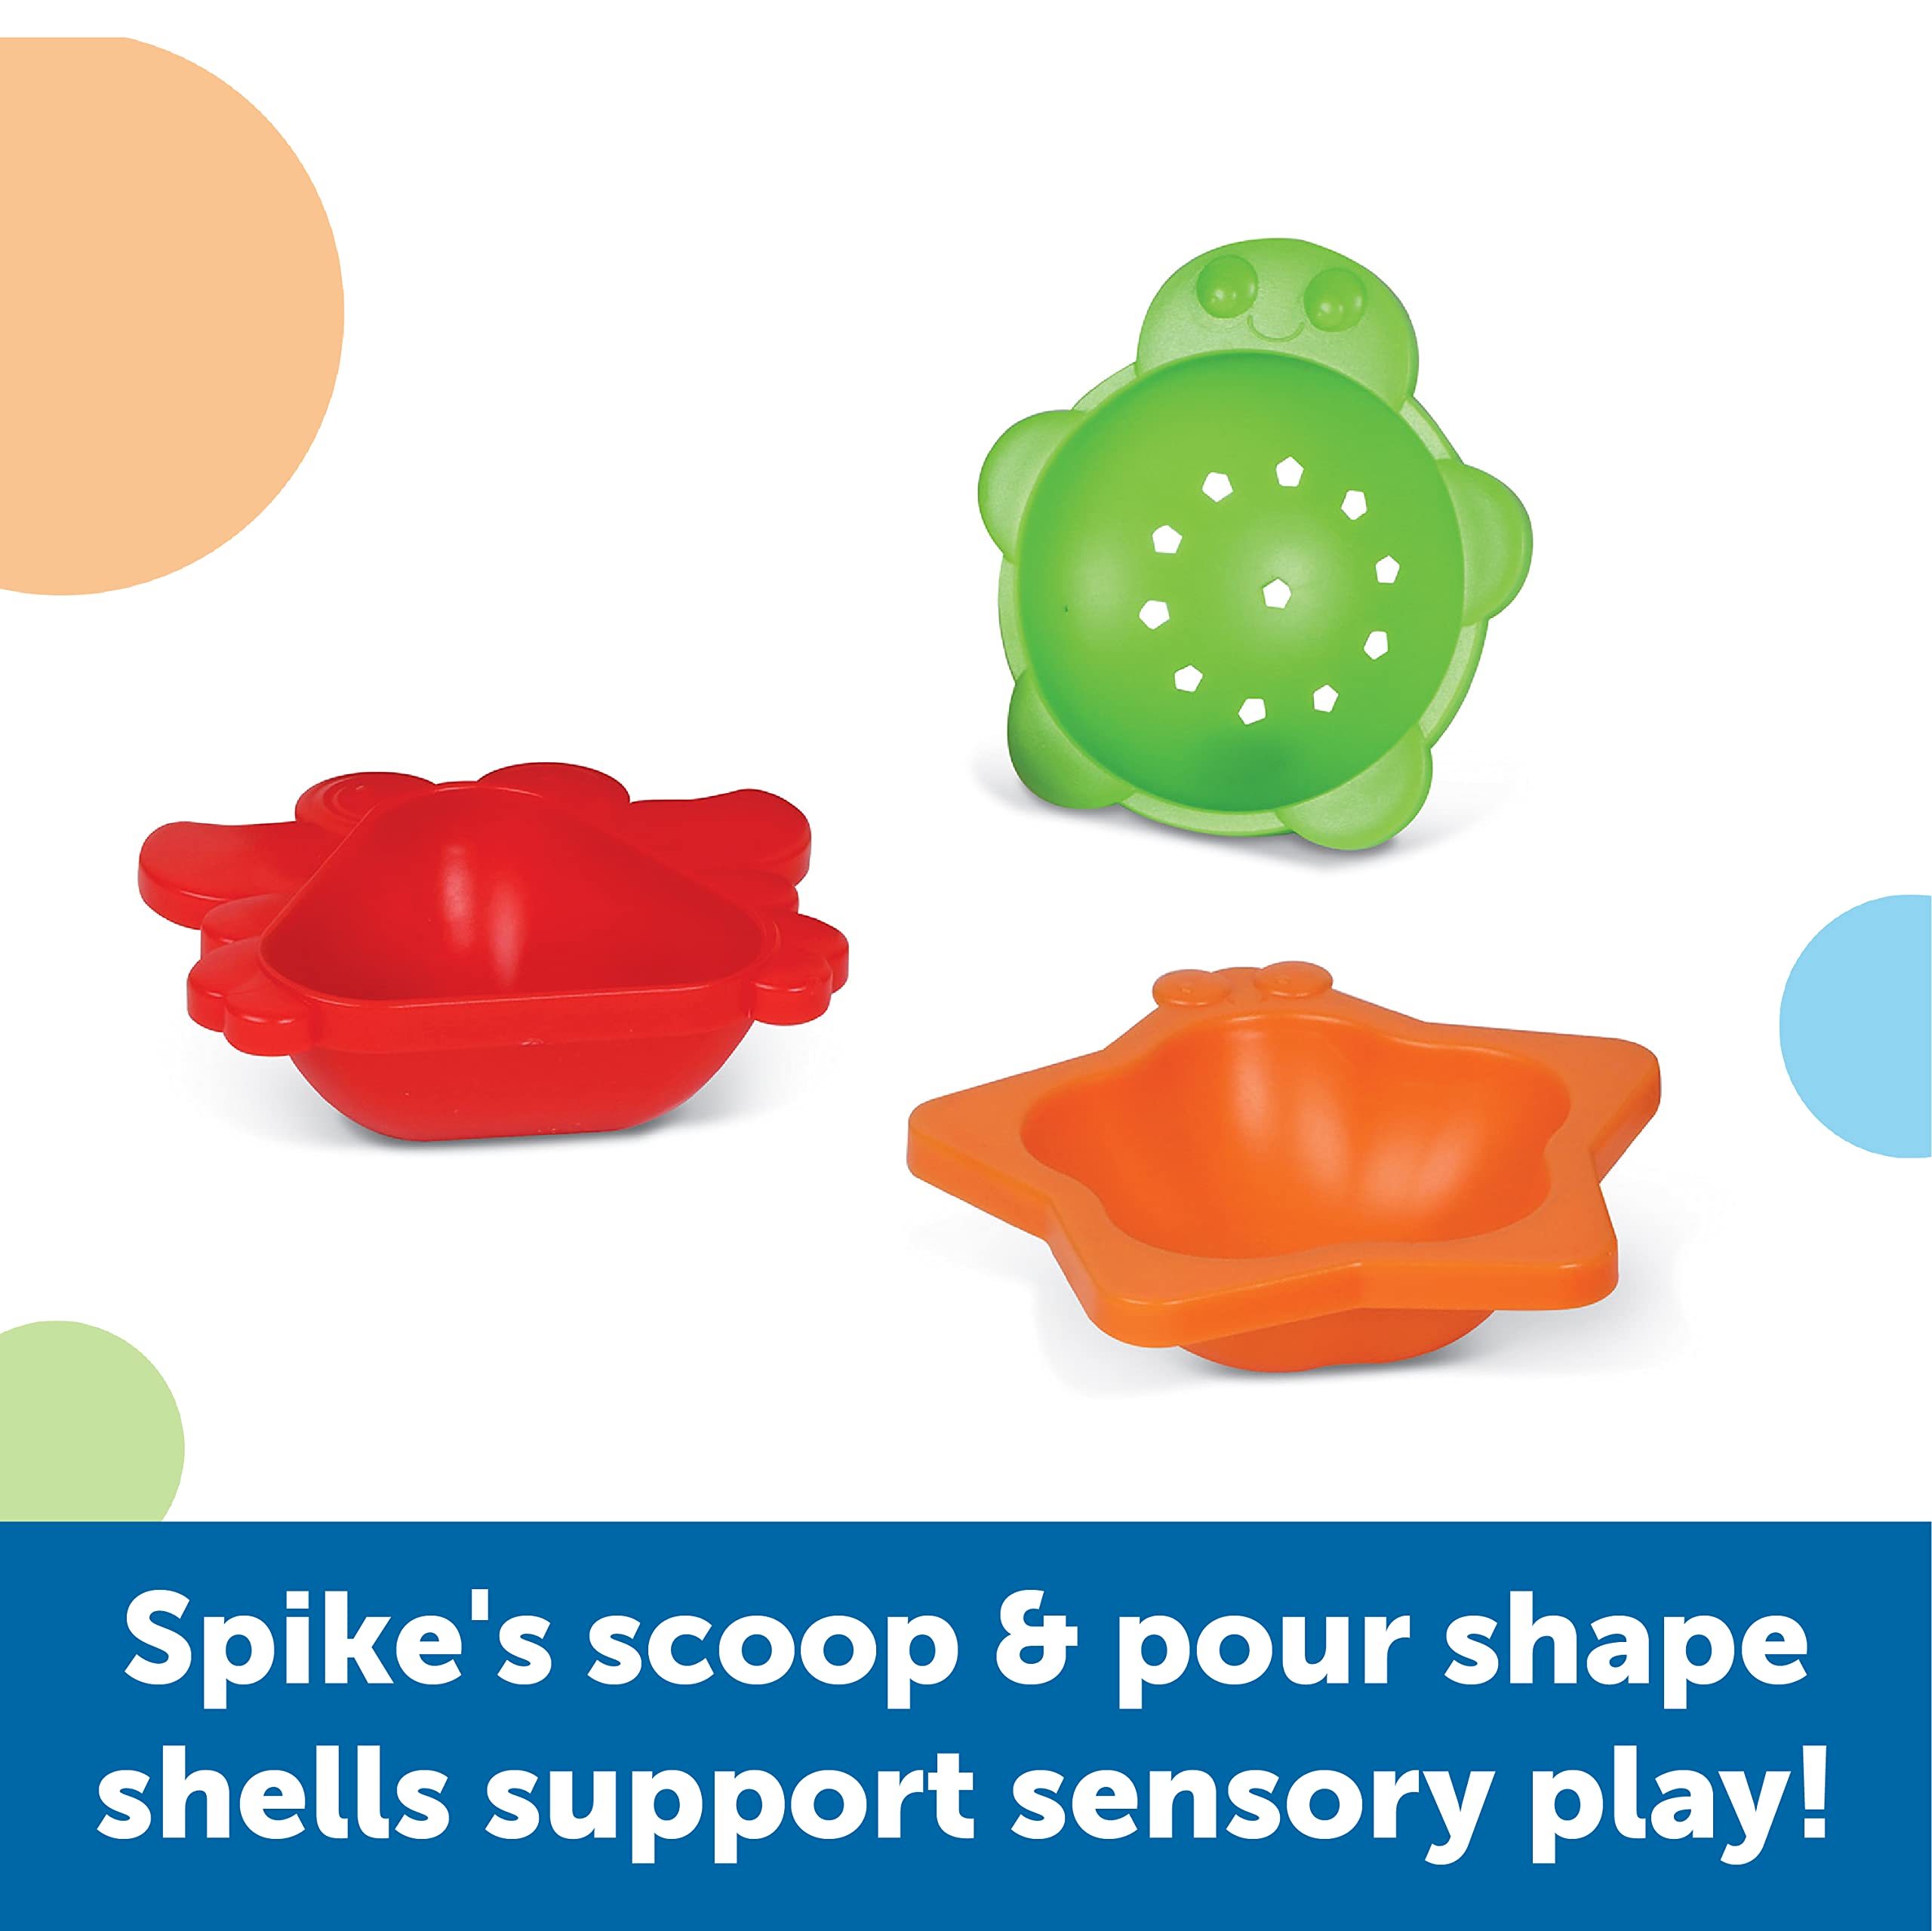 Learning Resources Spike The Fine Motor Hedgehog Splashin Bath Friends - Bath Toys for Kids Ages 18+ Months, Toddler Bathtub Toys, Water Tray Toys, Stocking Stuffers